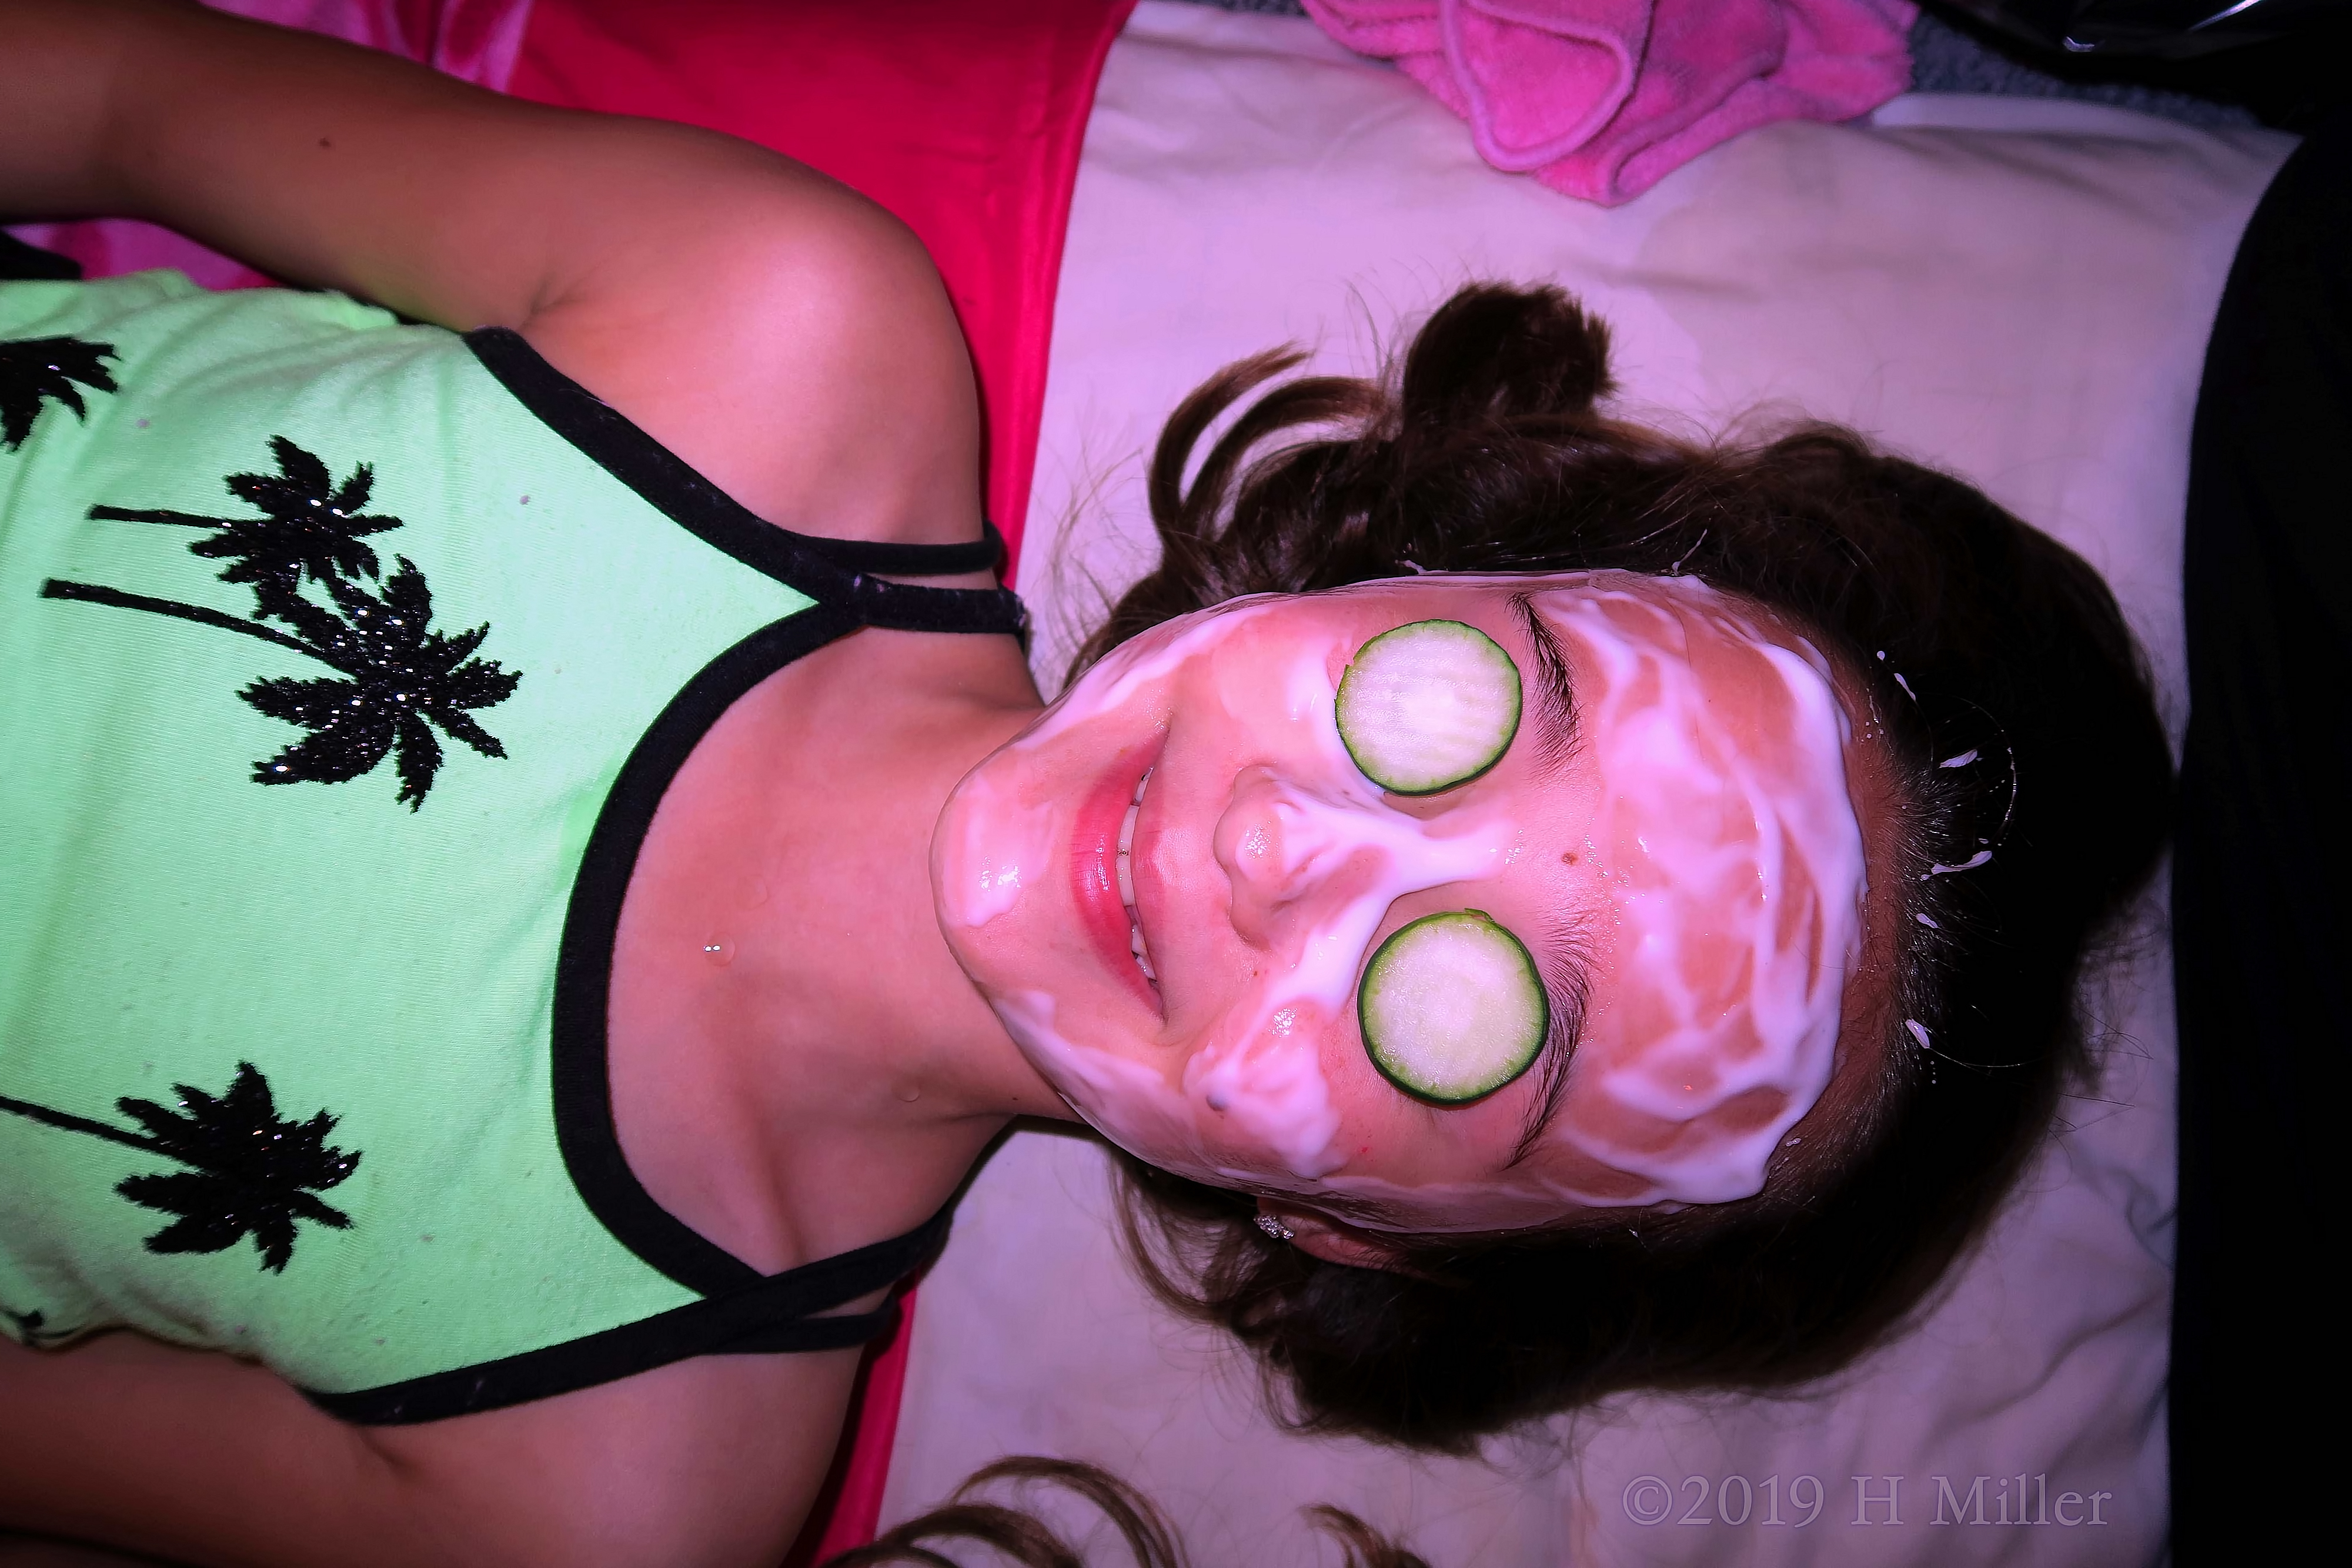 Smiling With Cukes On The Eyes And A Facial For Girls! 4